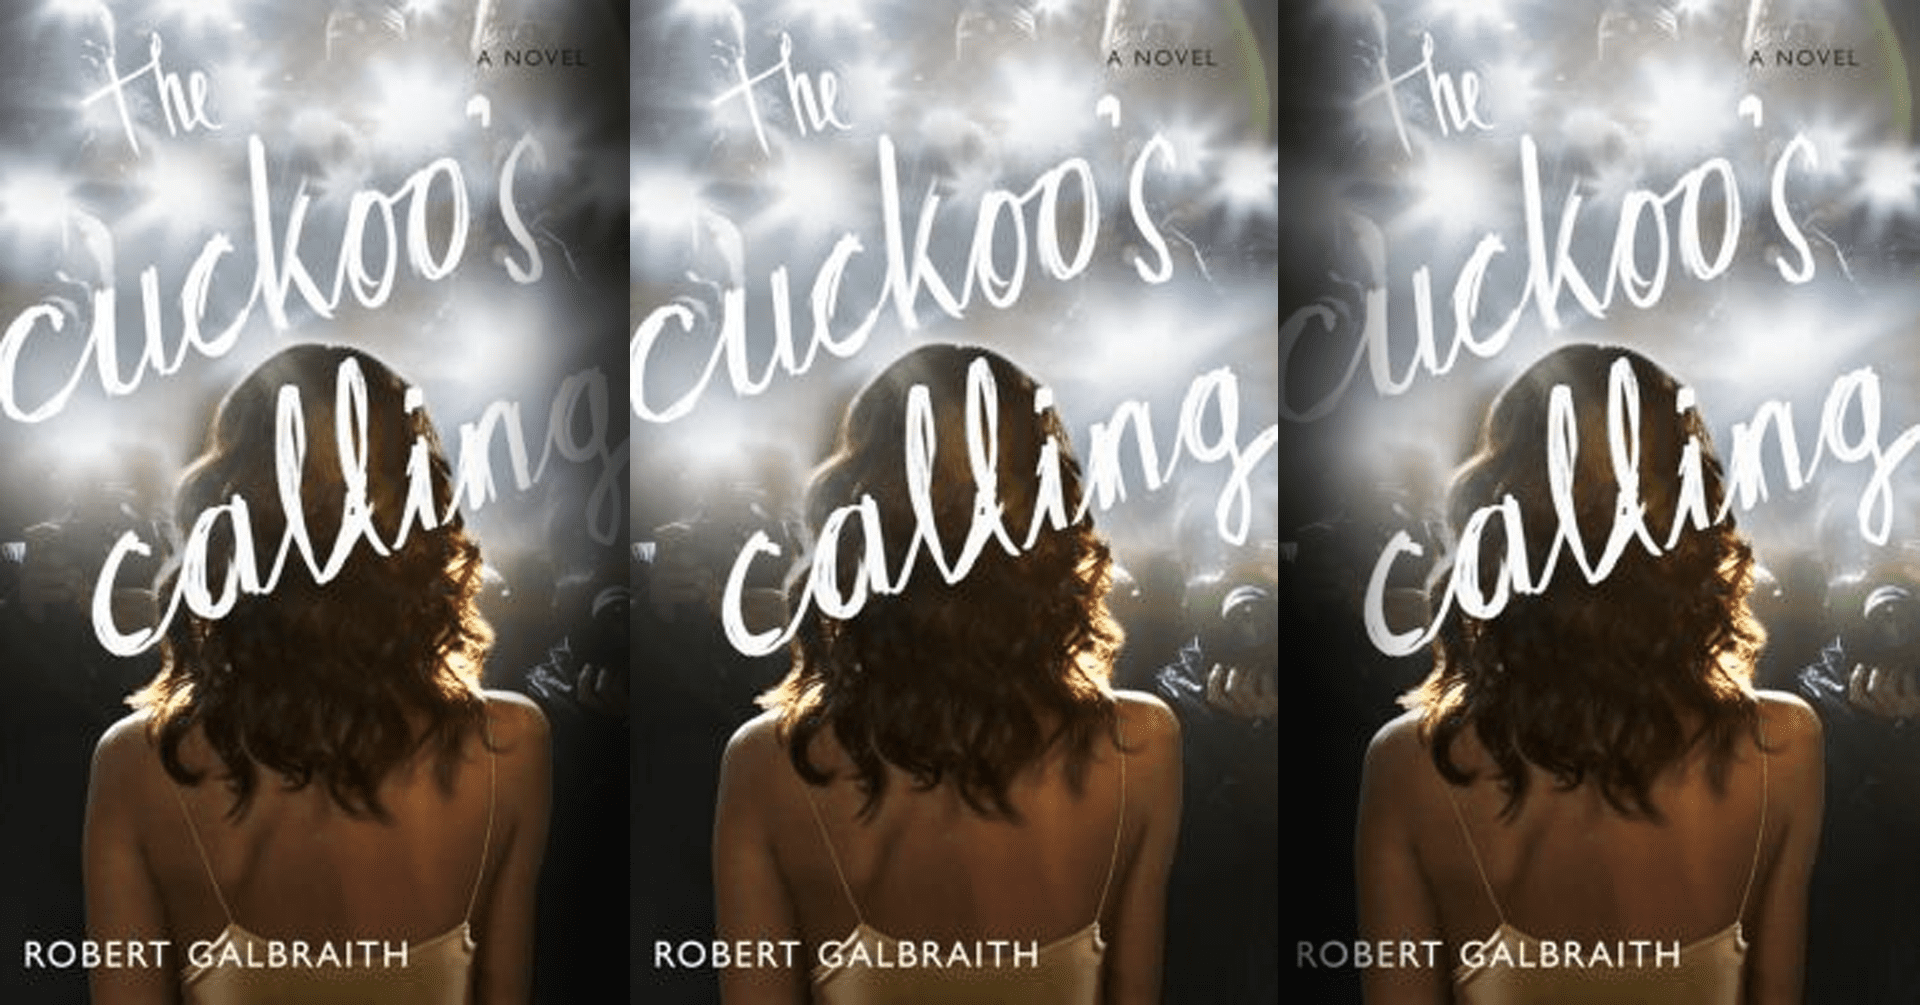 Book Cover: The Cuckoo's Calling by Robert Galbraith